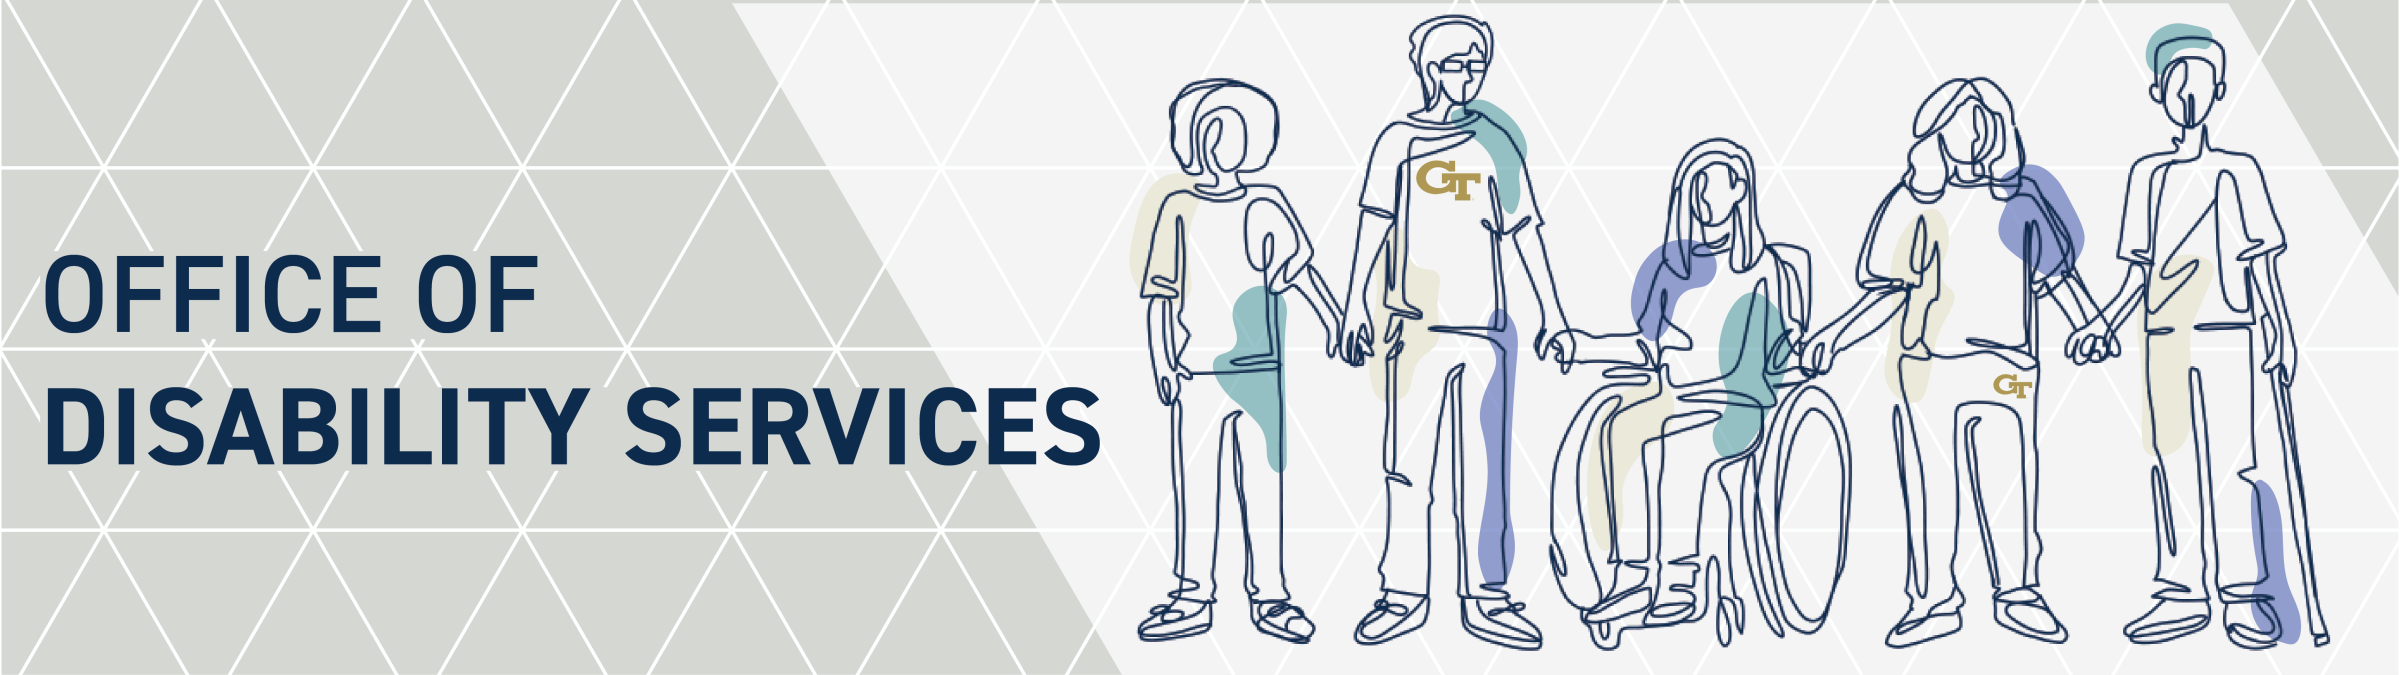 Office of Disability Services. Line art illustration of 5 students holding hands. One is on a wheelchair, one wearing glasses, and one with a cane.